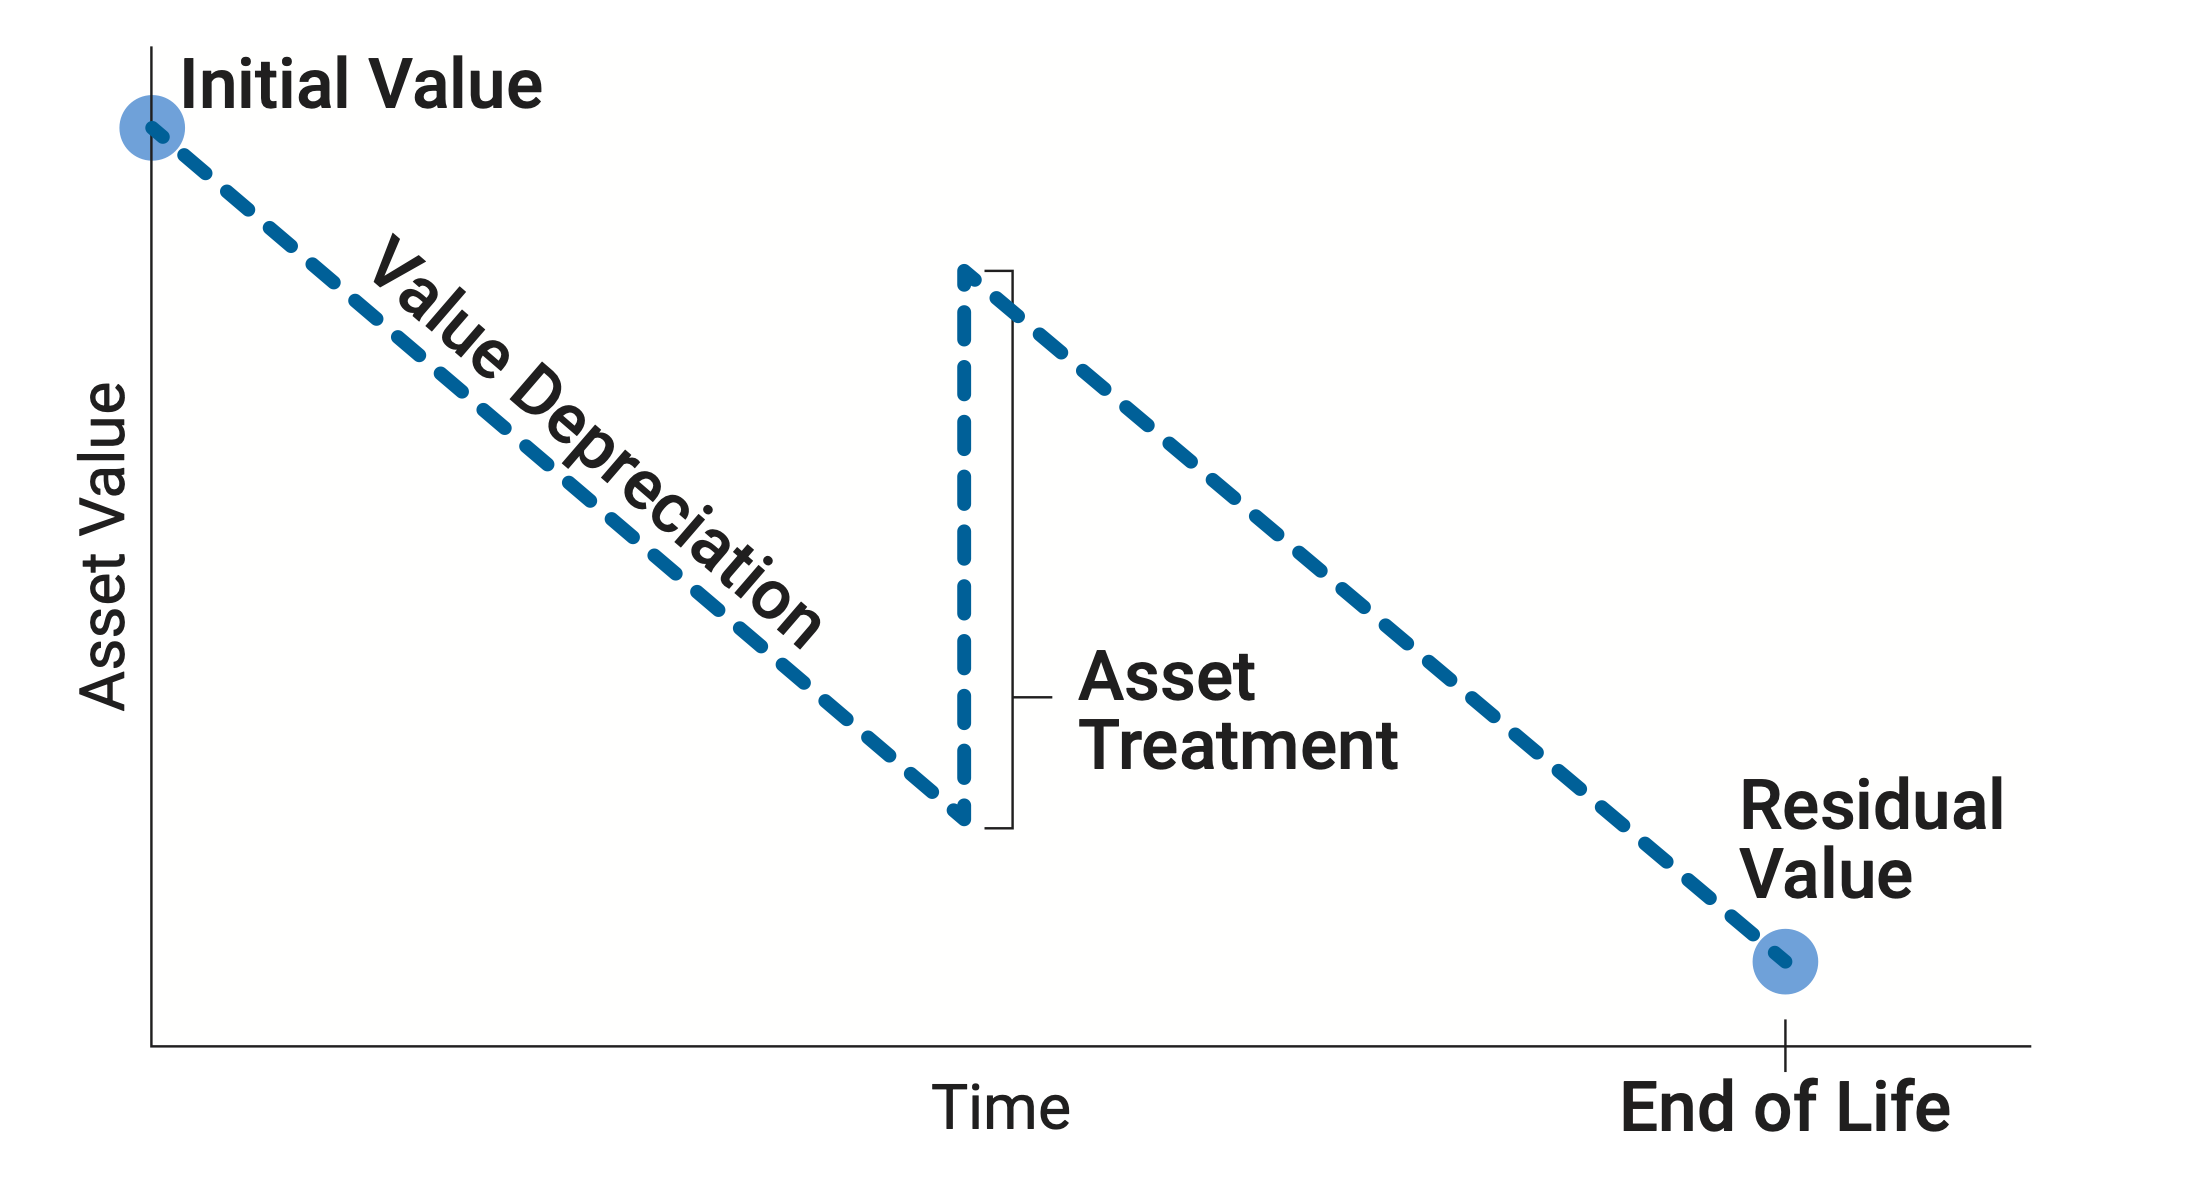 graphical depiction of asset value as it decreases over time; includes an increase in value for asset treatments and highlights the residual value at the end of life